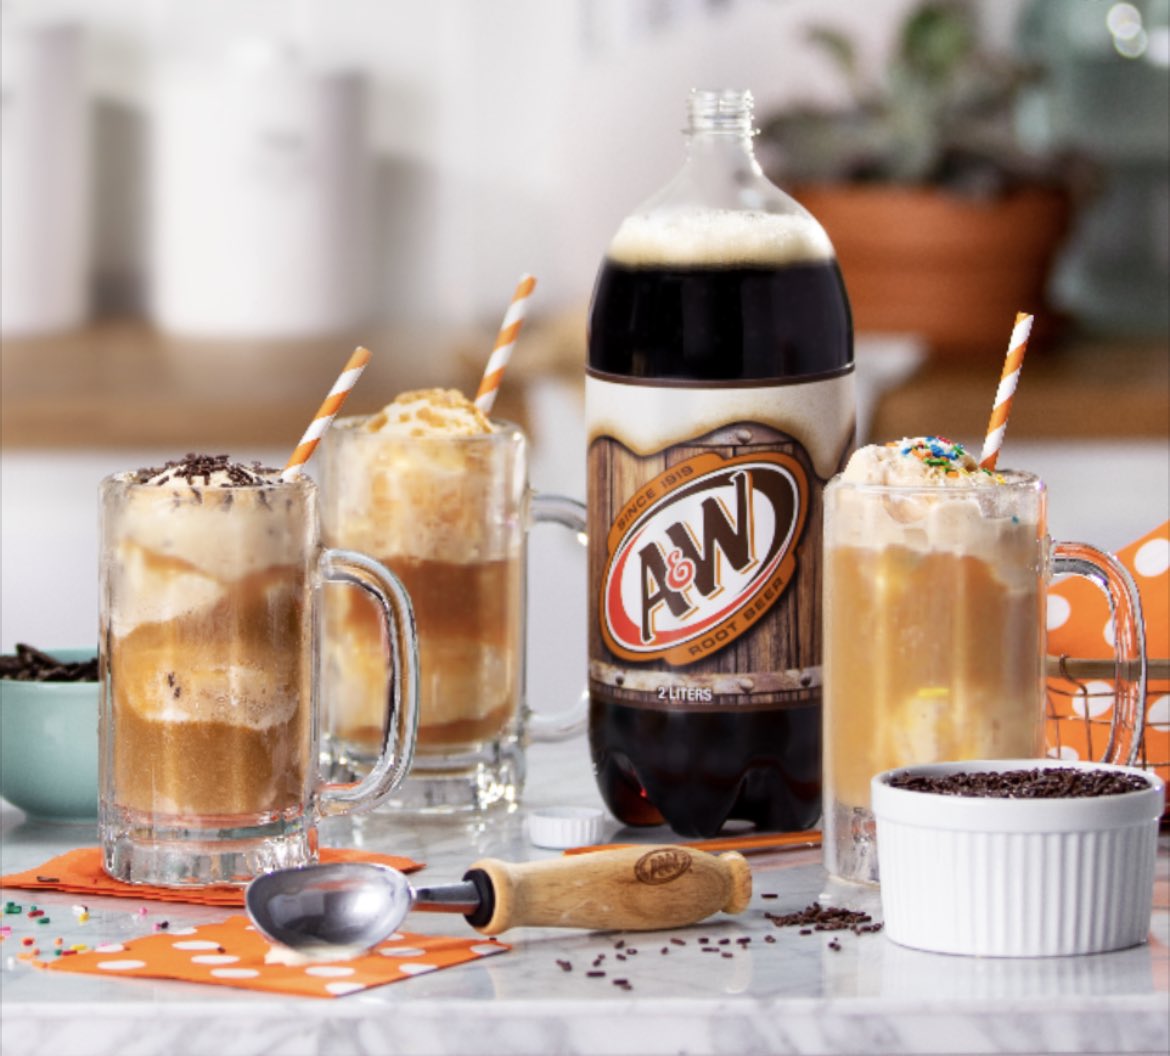 Did you celebrate National Ice Cream Day yesterday? We like our ice cream with smooth A&W Root Beer!

#Magbevco #aandwrootbeer #nationalicecreamday https://t.co/ZY0rG1R3DL